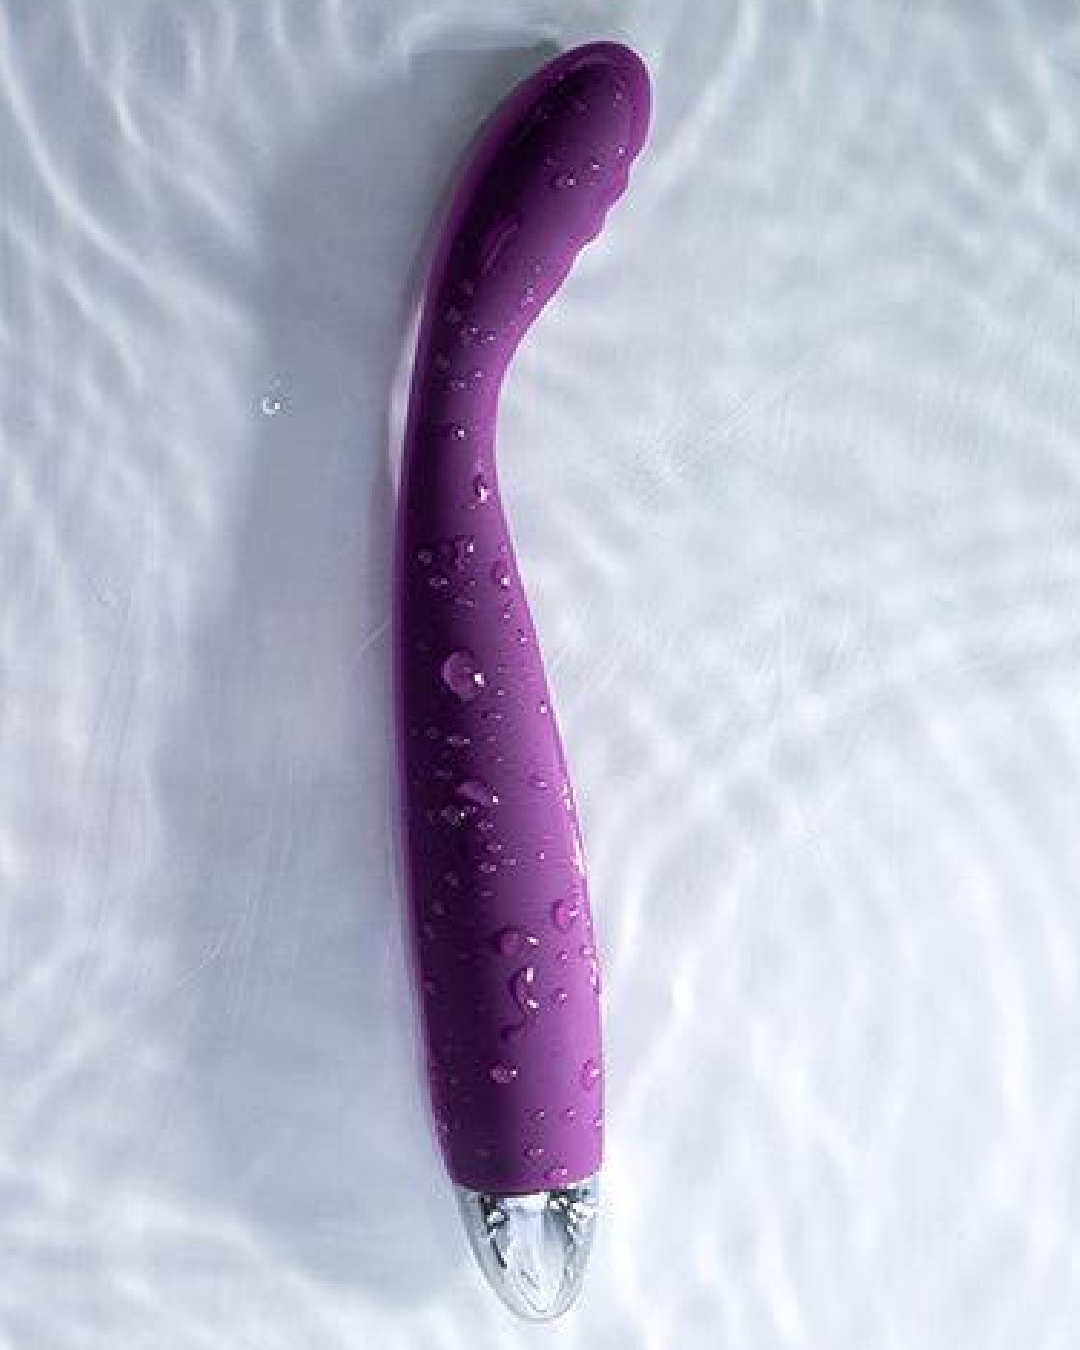 Svakom Cici Flexible G Spot Vibrator side view in water 